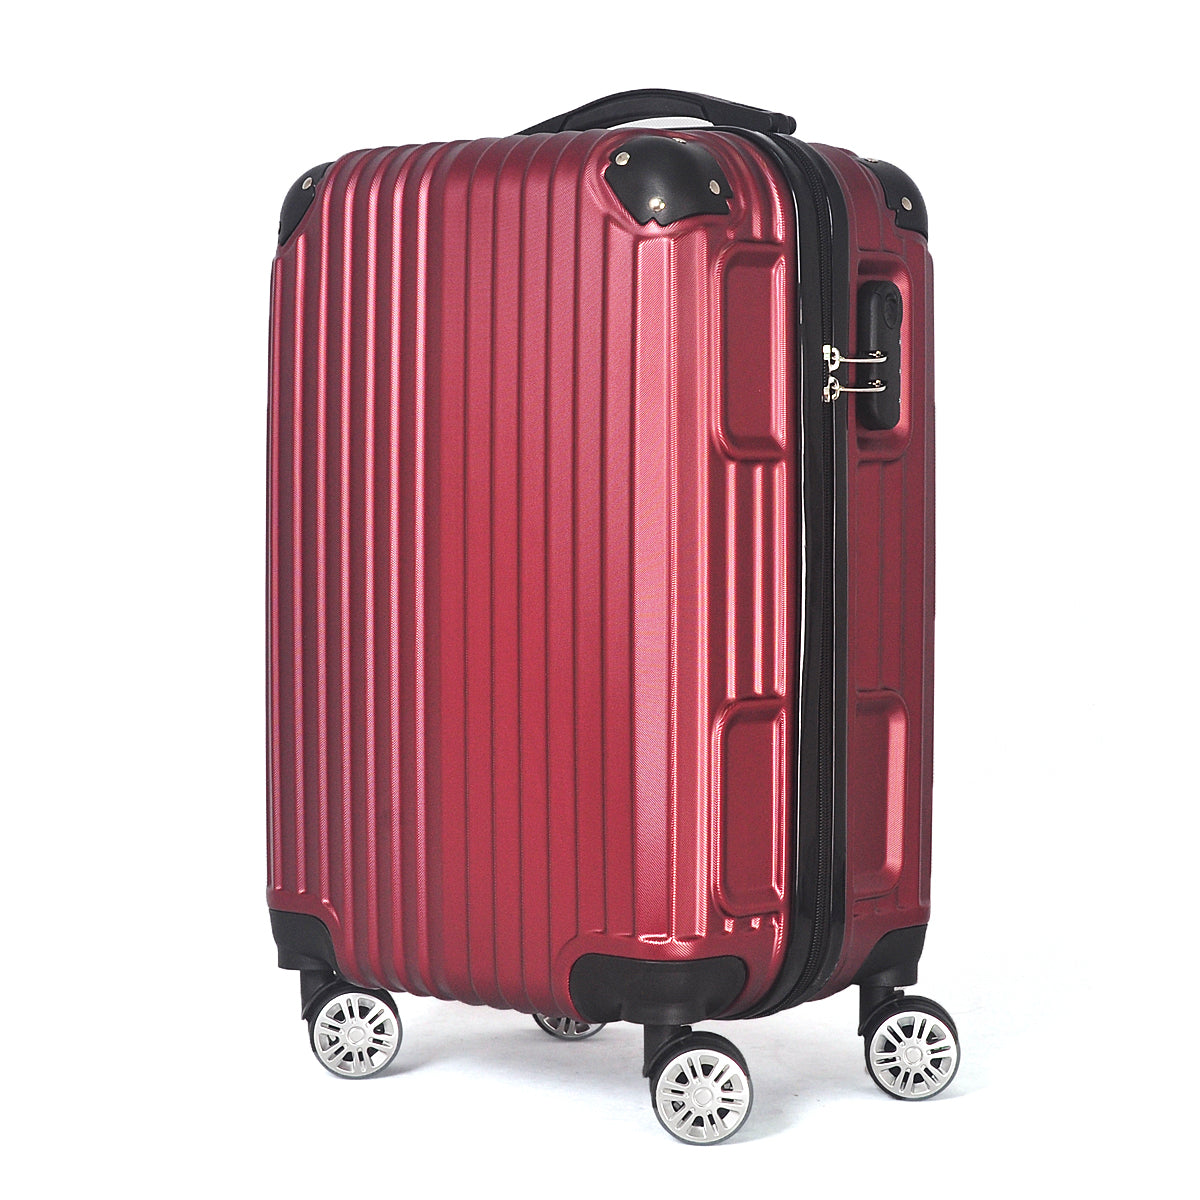 Luggage - Hard Carry-on Spinner